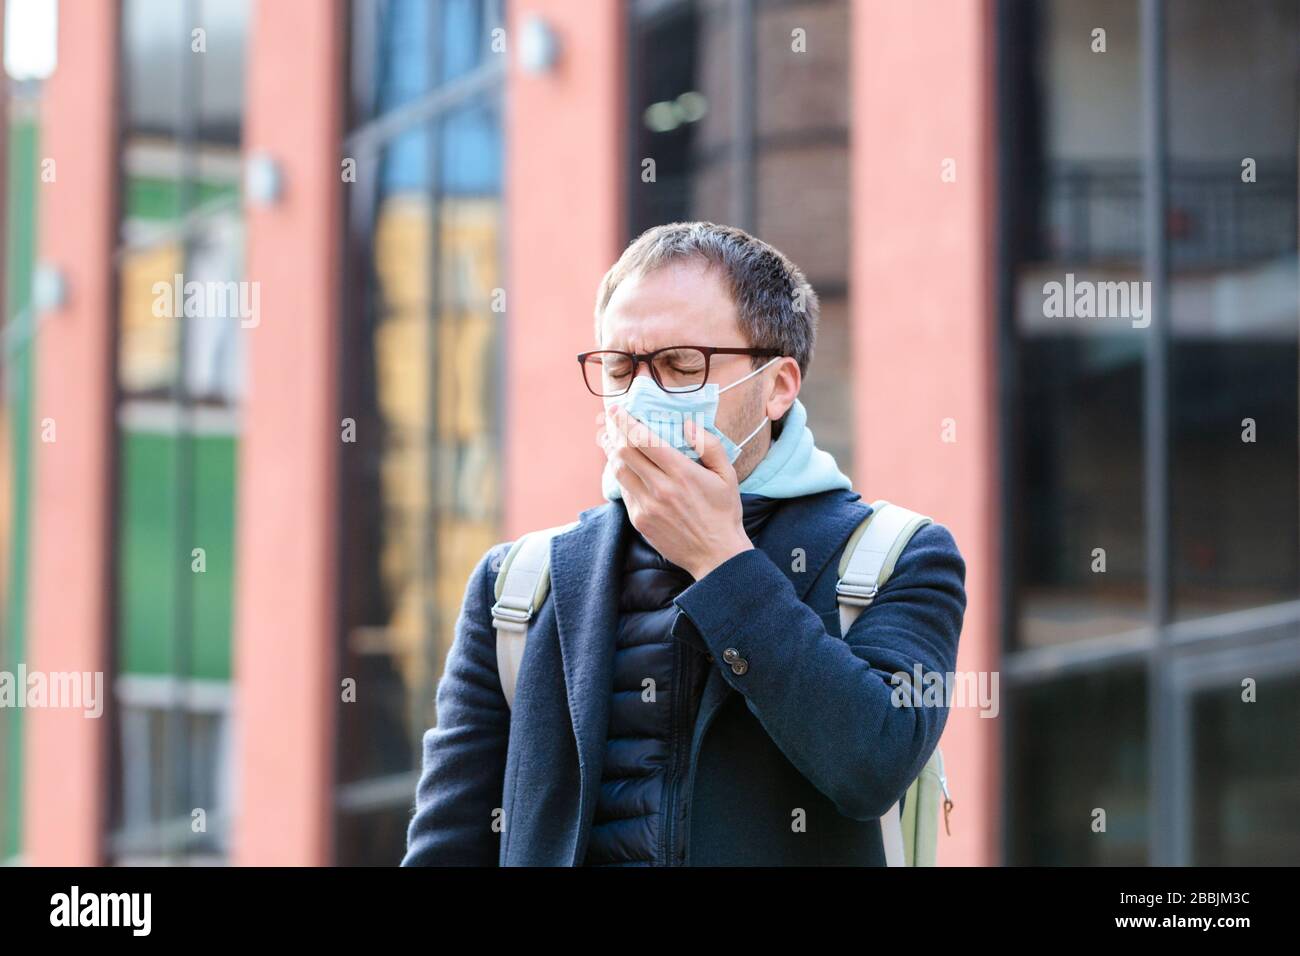 Man in glasses feeling sick outdoors, coughing, wearing protective mask against transmissible infectious diseases, pollen allergy, protection against Stock Photo